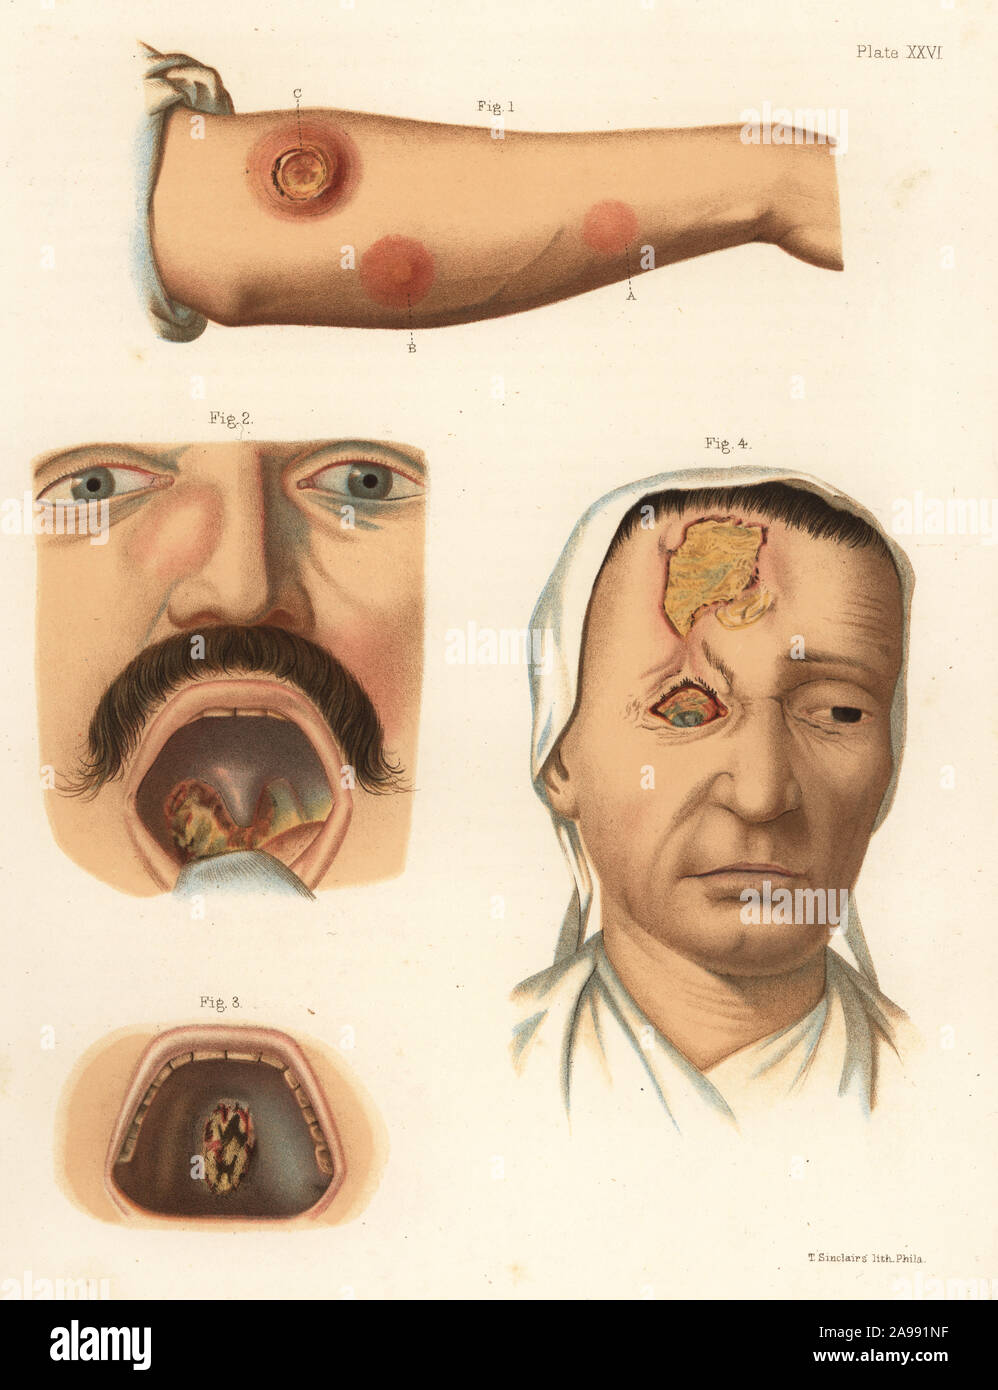 Tertiary period syphilis symptoms on the body. Gummata or gummy tumors of the forearm 1, osteitis of the bones of the nose and gummata of the tonsils 2, osteitis and ulceration of the palate 3, necrosis of the frontal bone 4. Chromolithograph by T. Sinclaire from Freeman J. Bumstead’s Atlas of Venereal Diseases, Henry C. Lea, Philadelphia, 1868. First American edition of Auguste Cullerier’s Precis iconographique des maladies veneriennes. Stock Photo